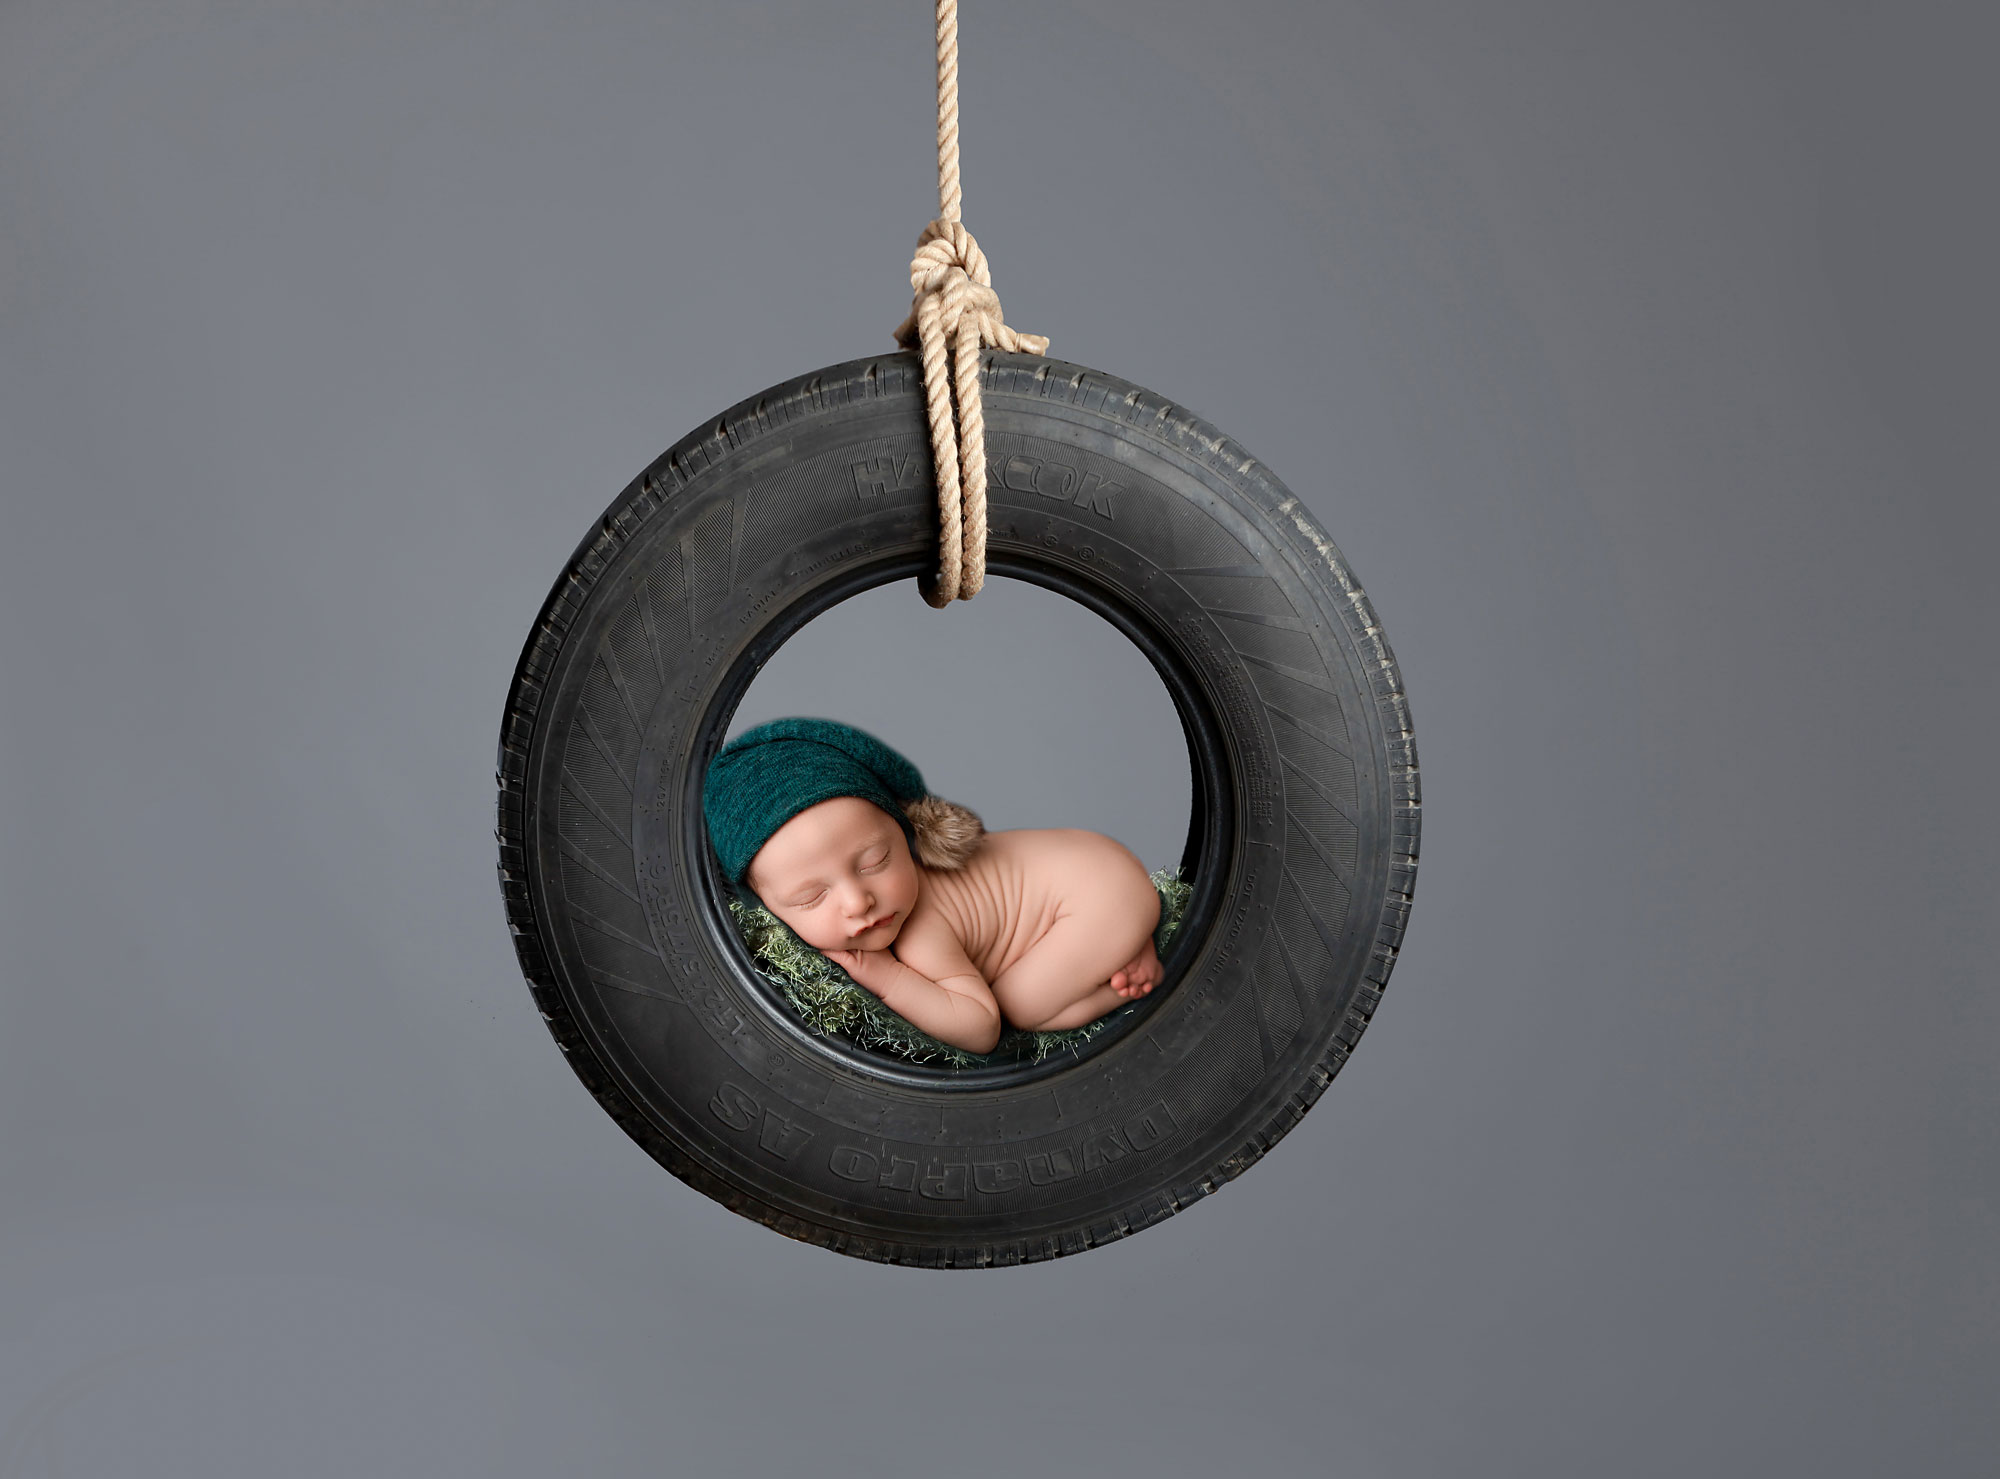 baby boy sleeping on a tire very creative and unique newborn images nj photographer